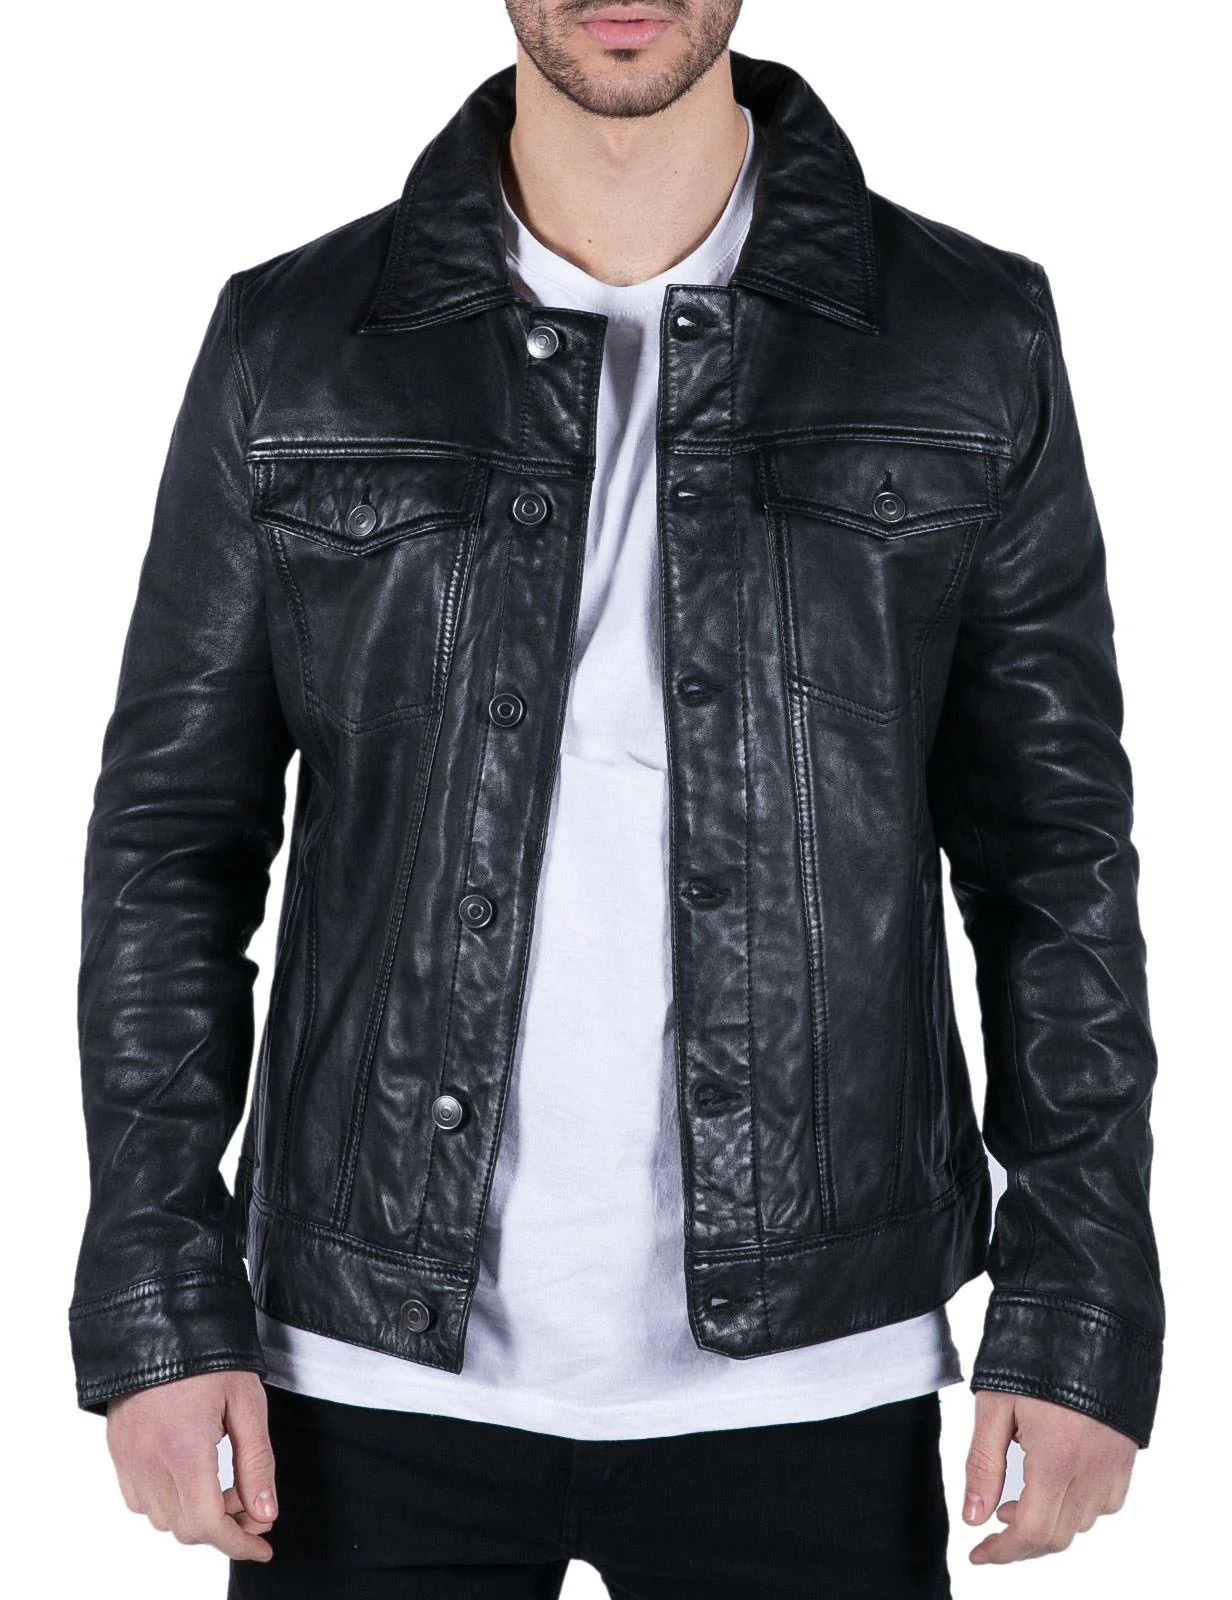 New Real Leather Jacket with Pigskin Leather Denim Jacket Brown Coat For  Men MXGX20-9 on sale